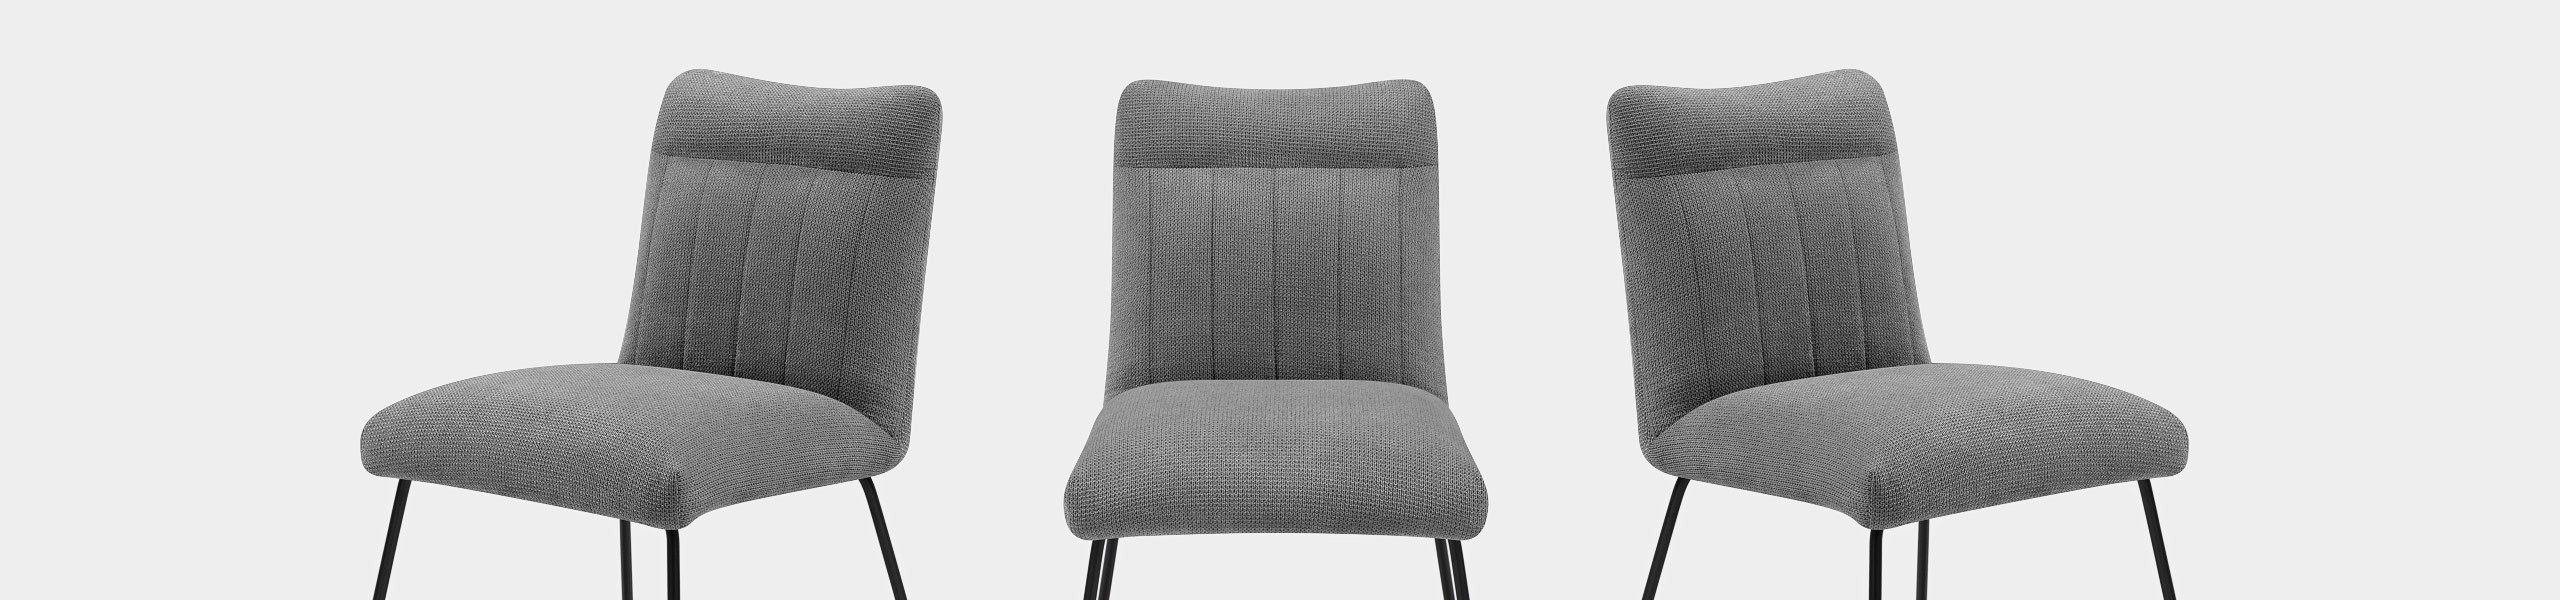 Milo Dining Chair Grey Fabric Video Banner